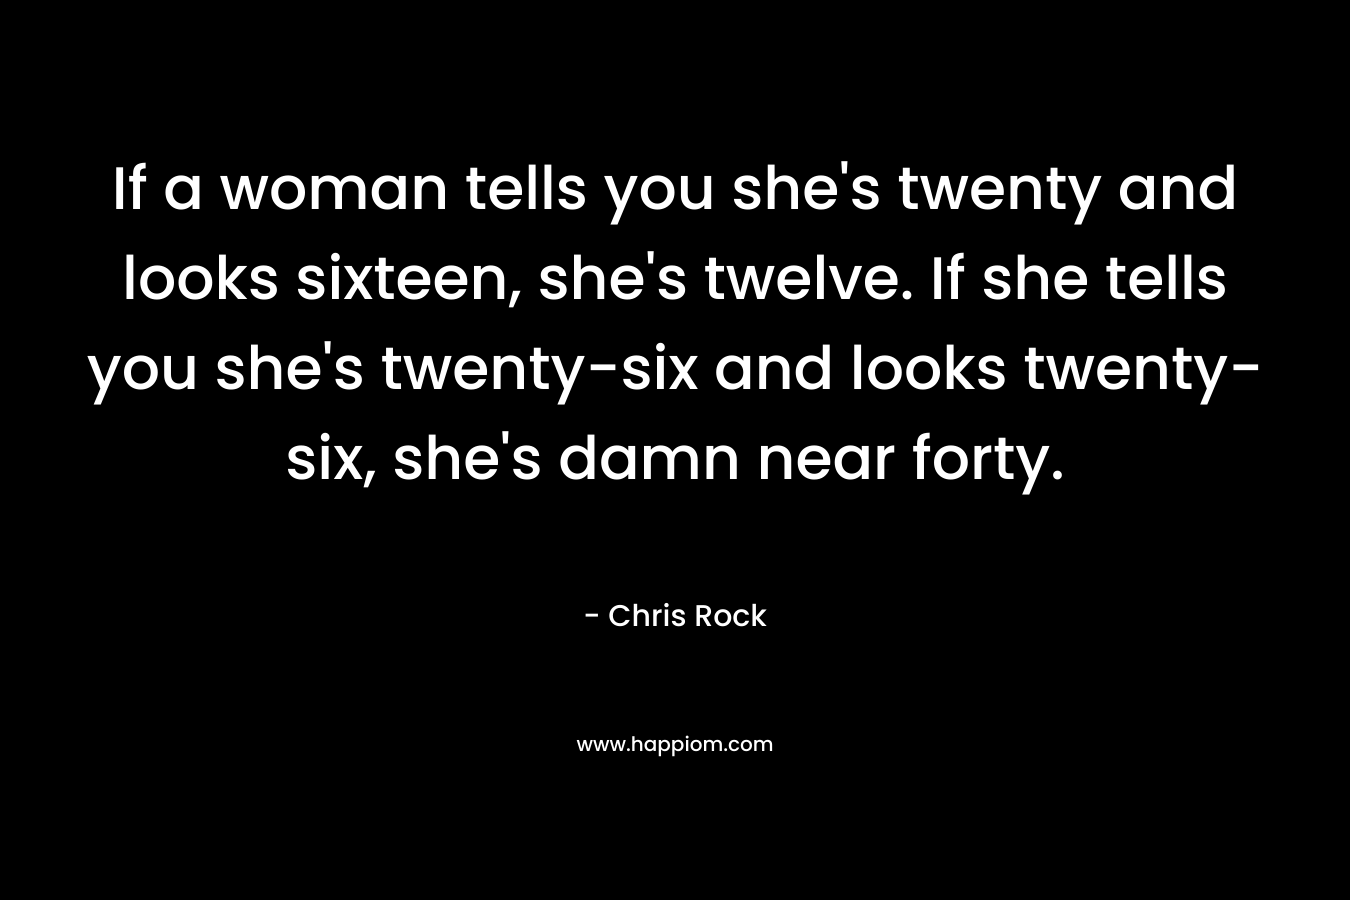 If a woman tells you she’s twenty and looks sixteen, she’s twelve. If she tells you she’s twenty-six and looks twenty-six, she’s damn near forty. – Chris Rock